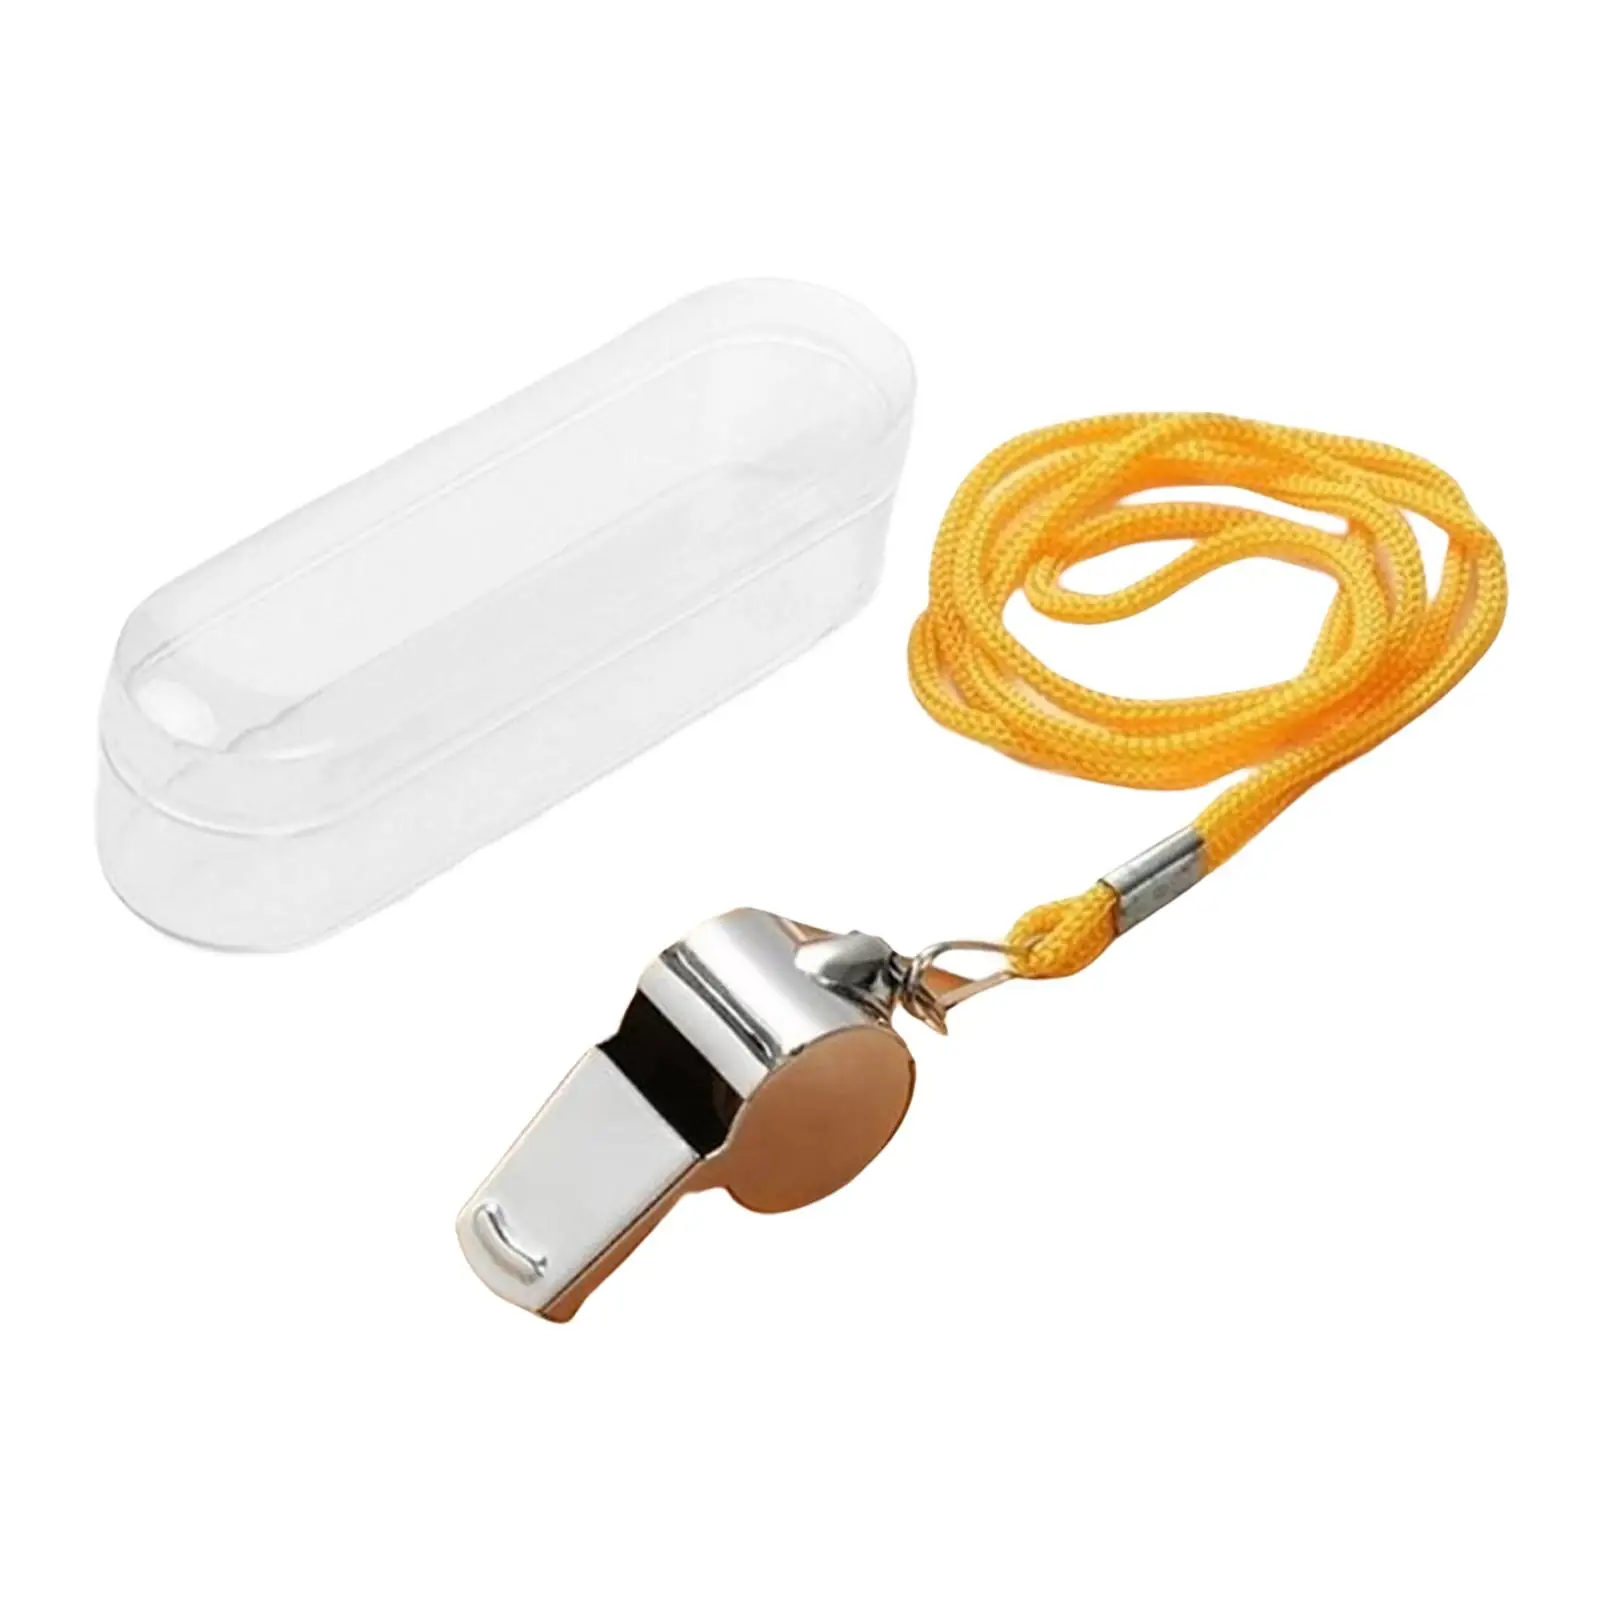 Stainless Steel Sports Whistles Super Loud for Football Training